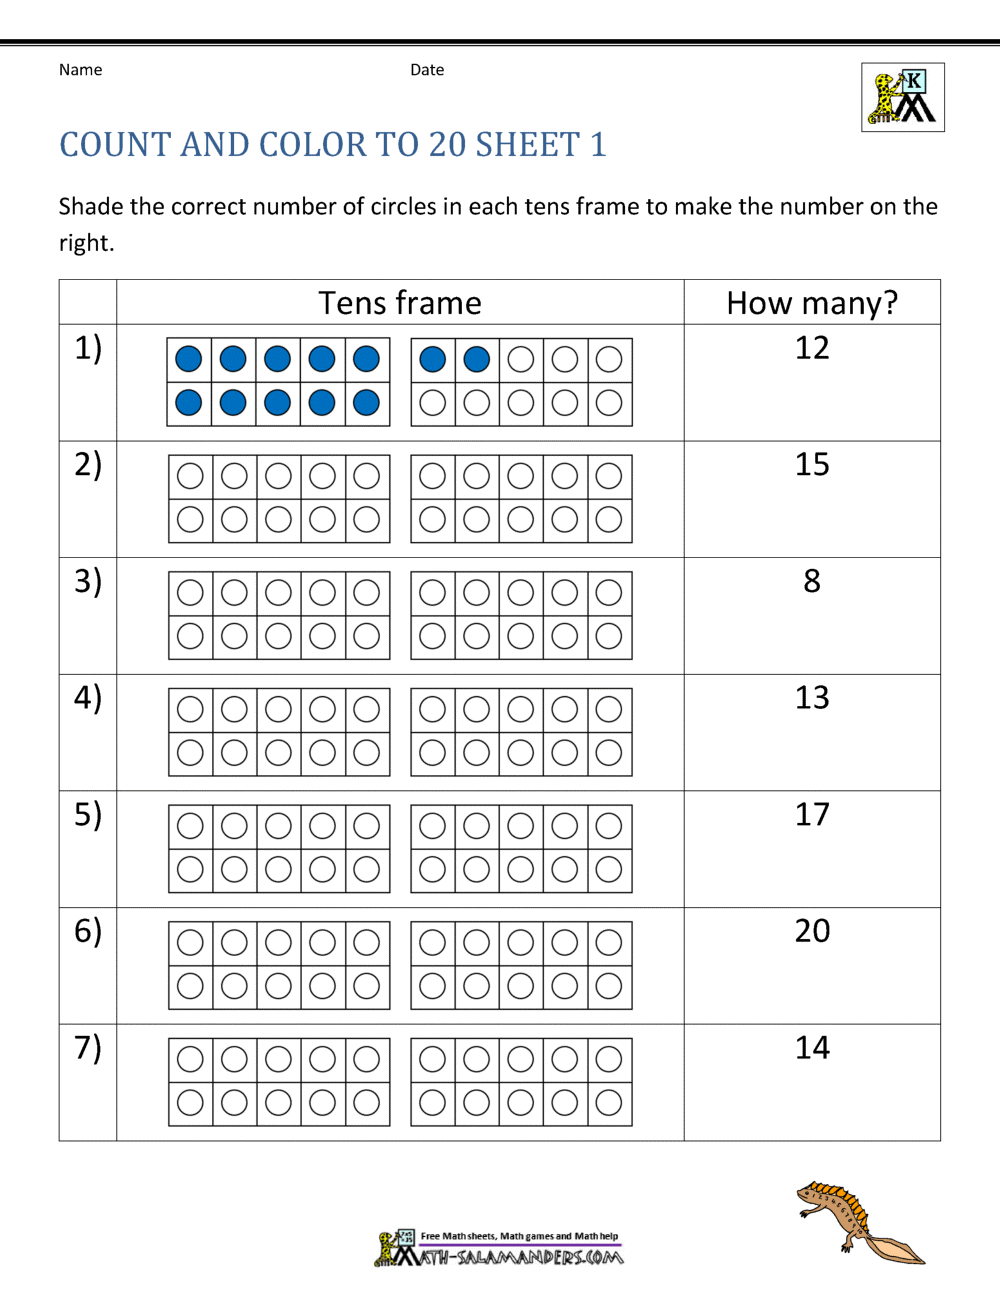 Counting to 20 Worksheets For Counting To 20 Worksheet